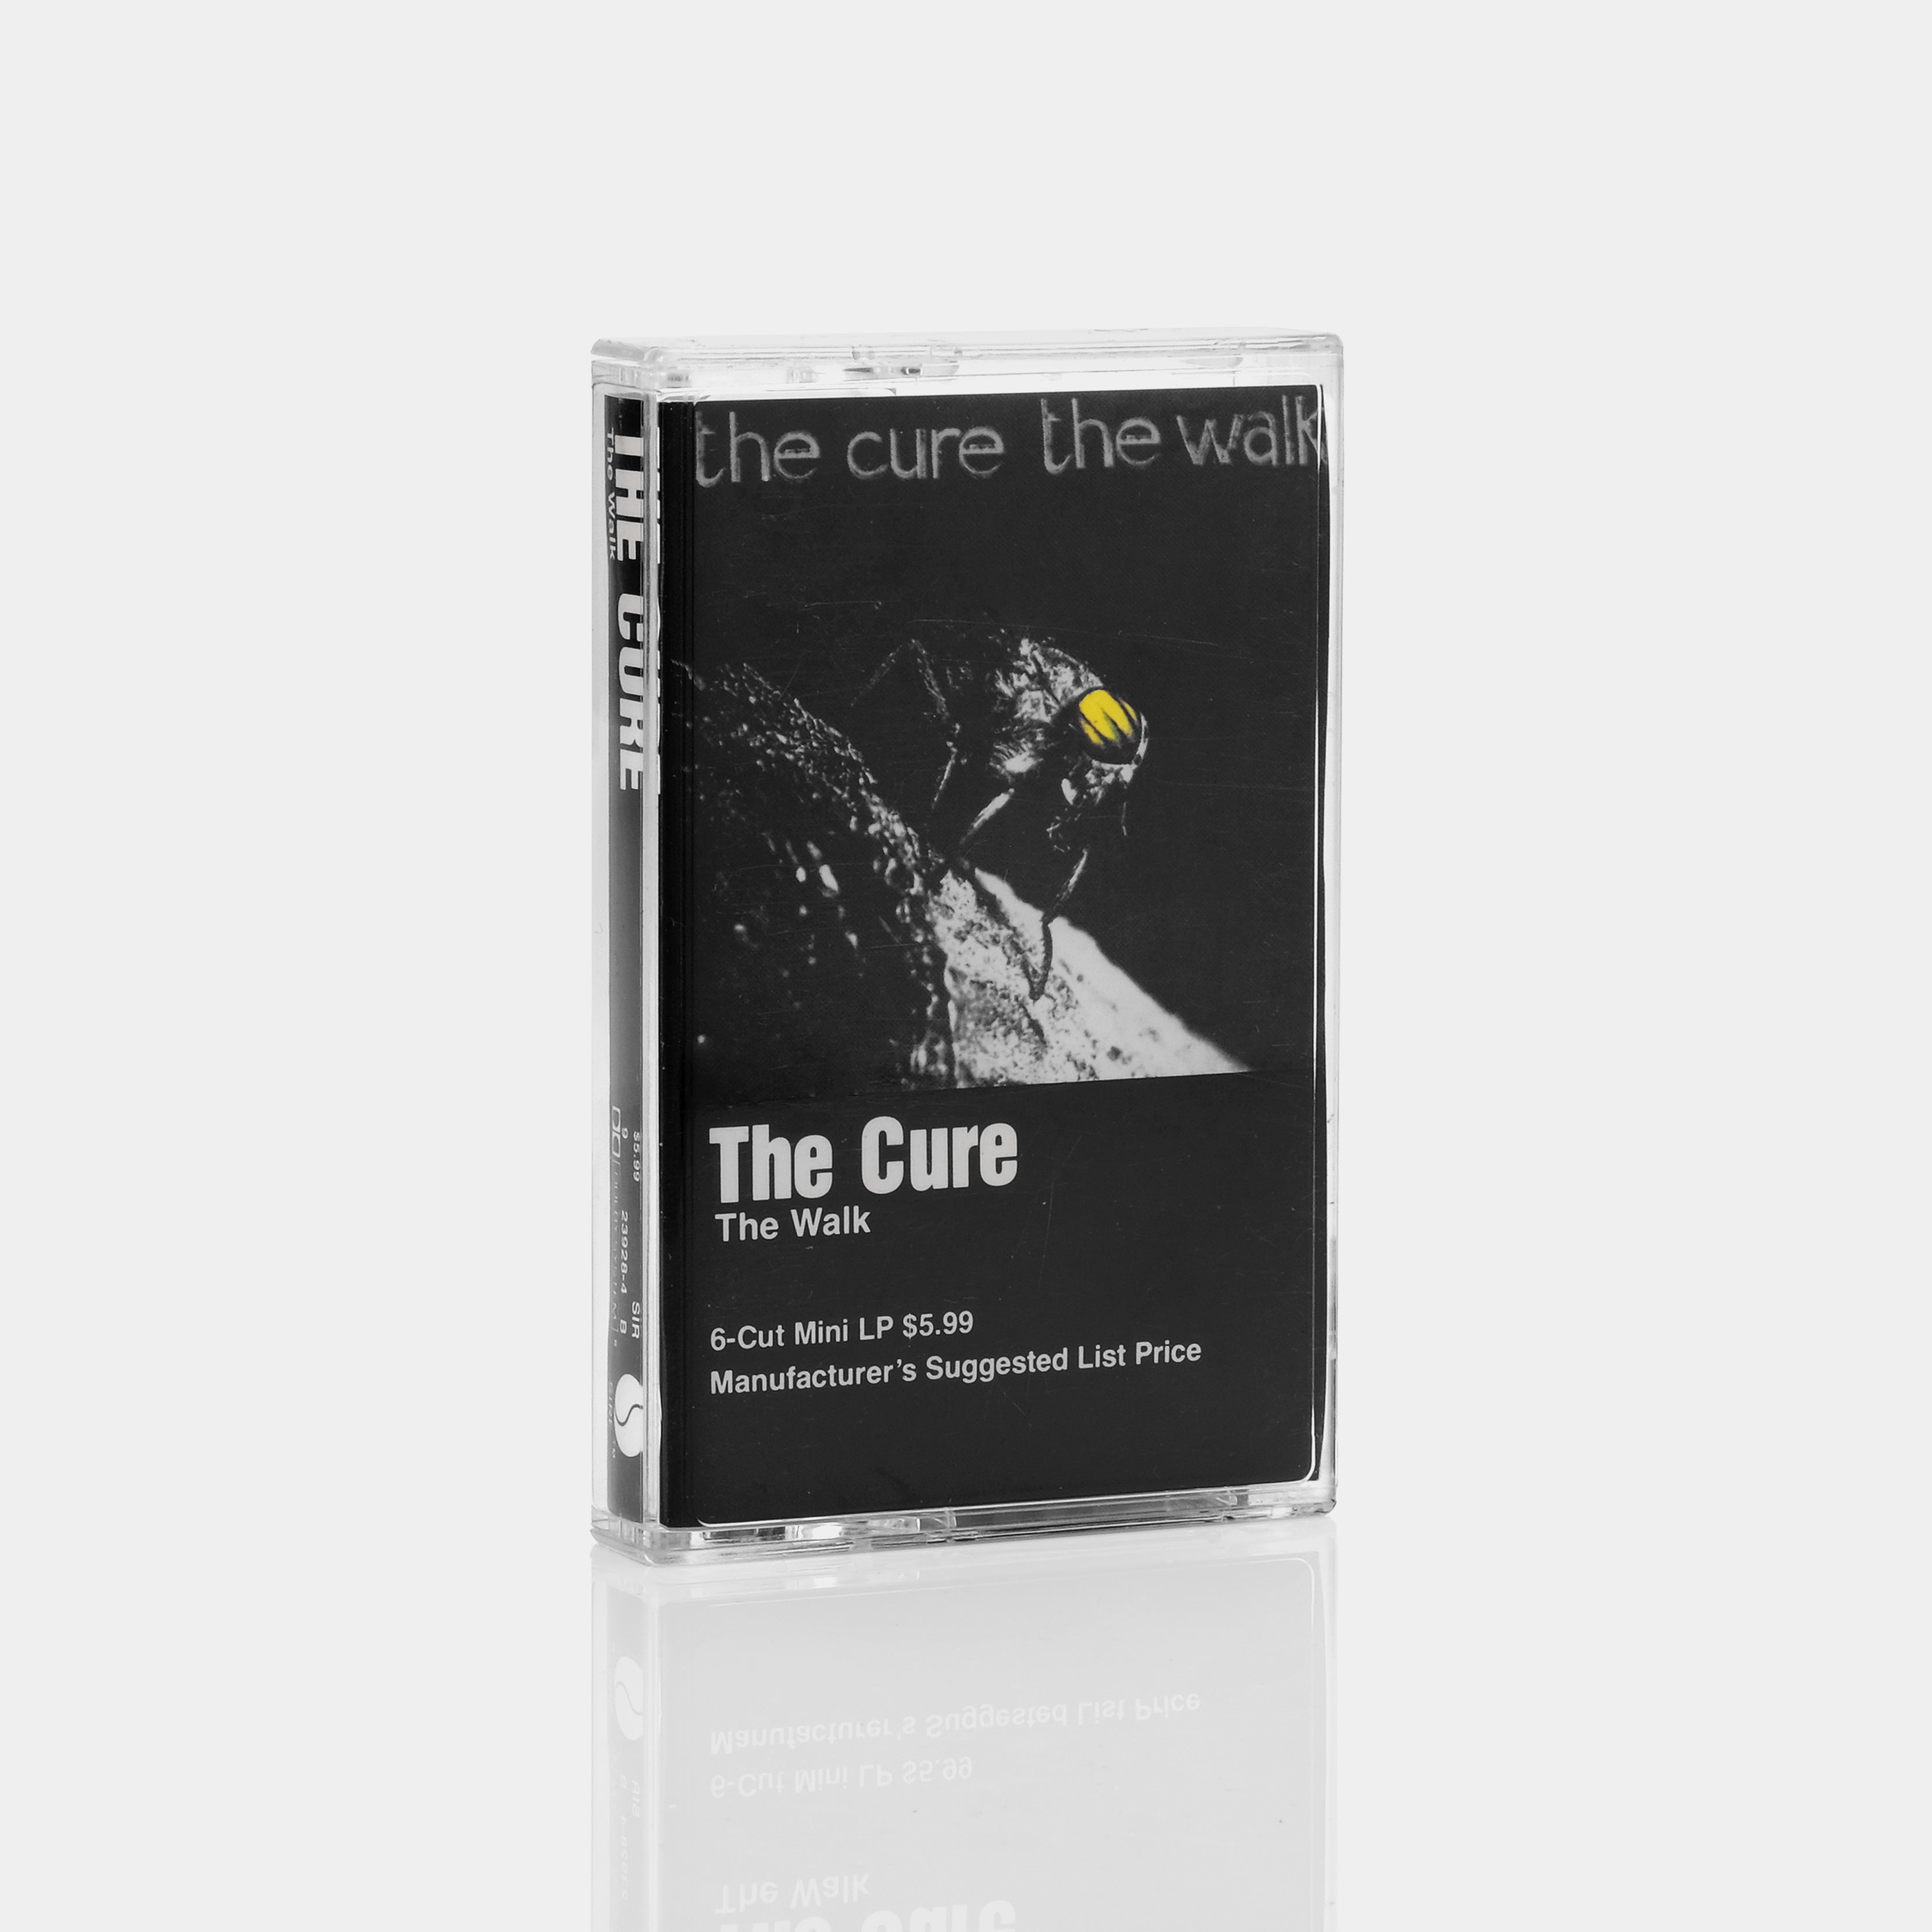 The Cure - The Walk Cassette Tape